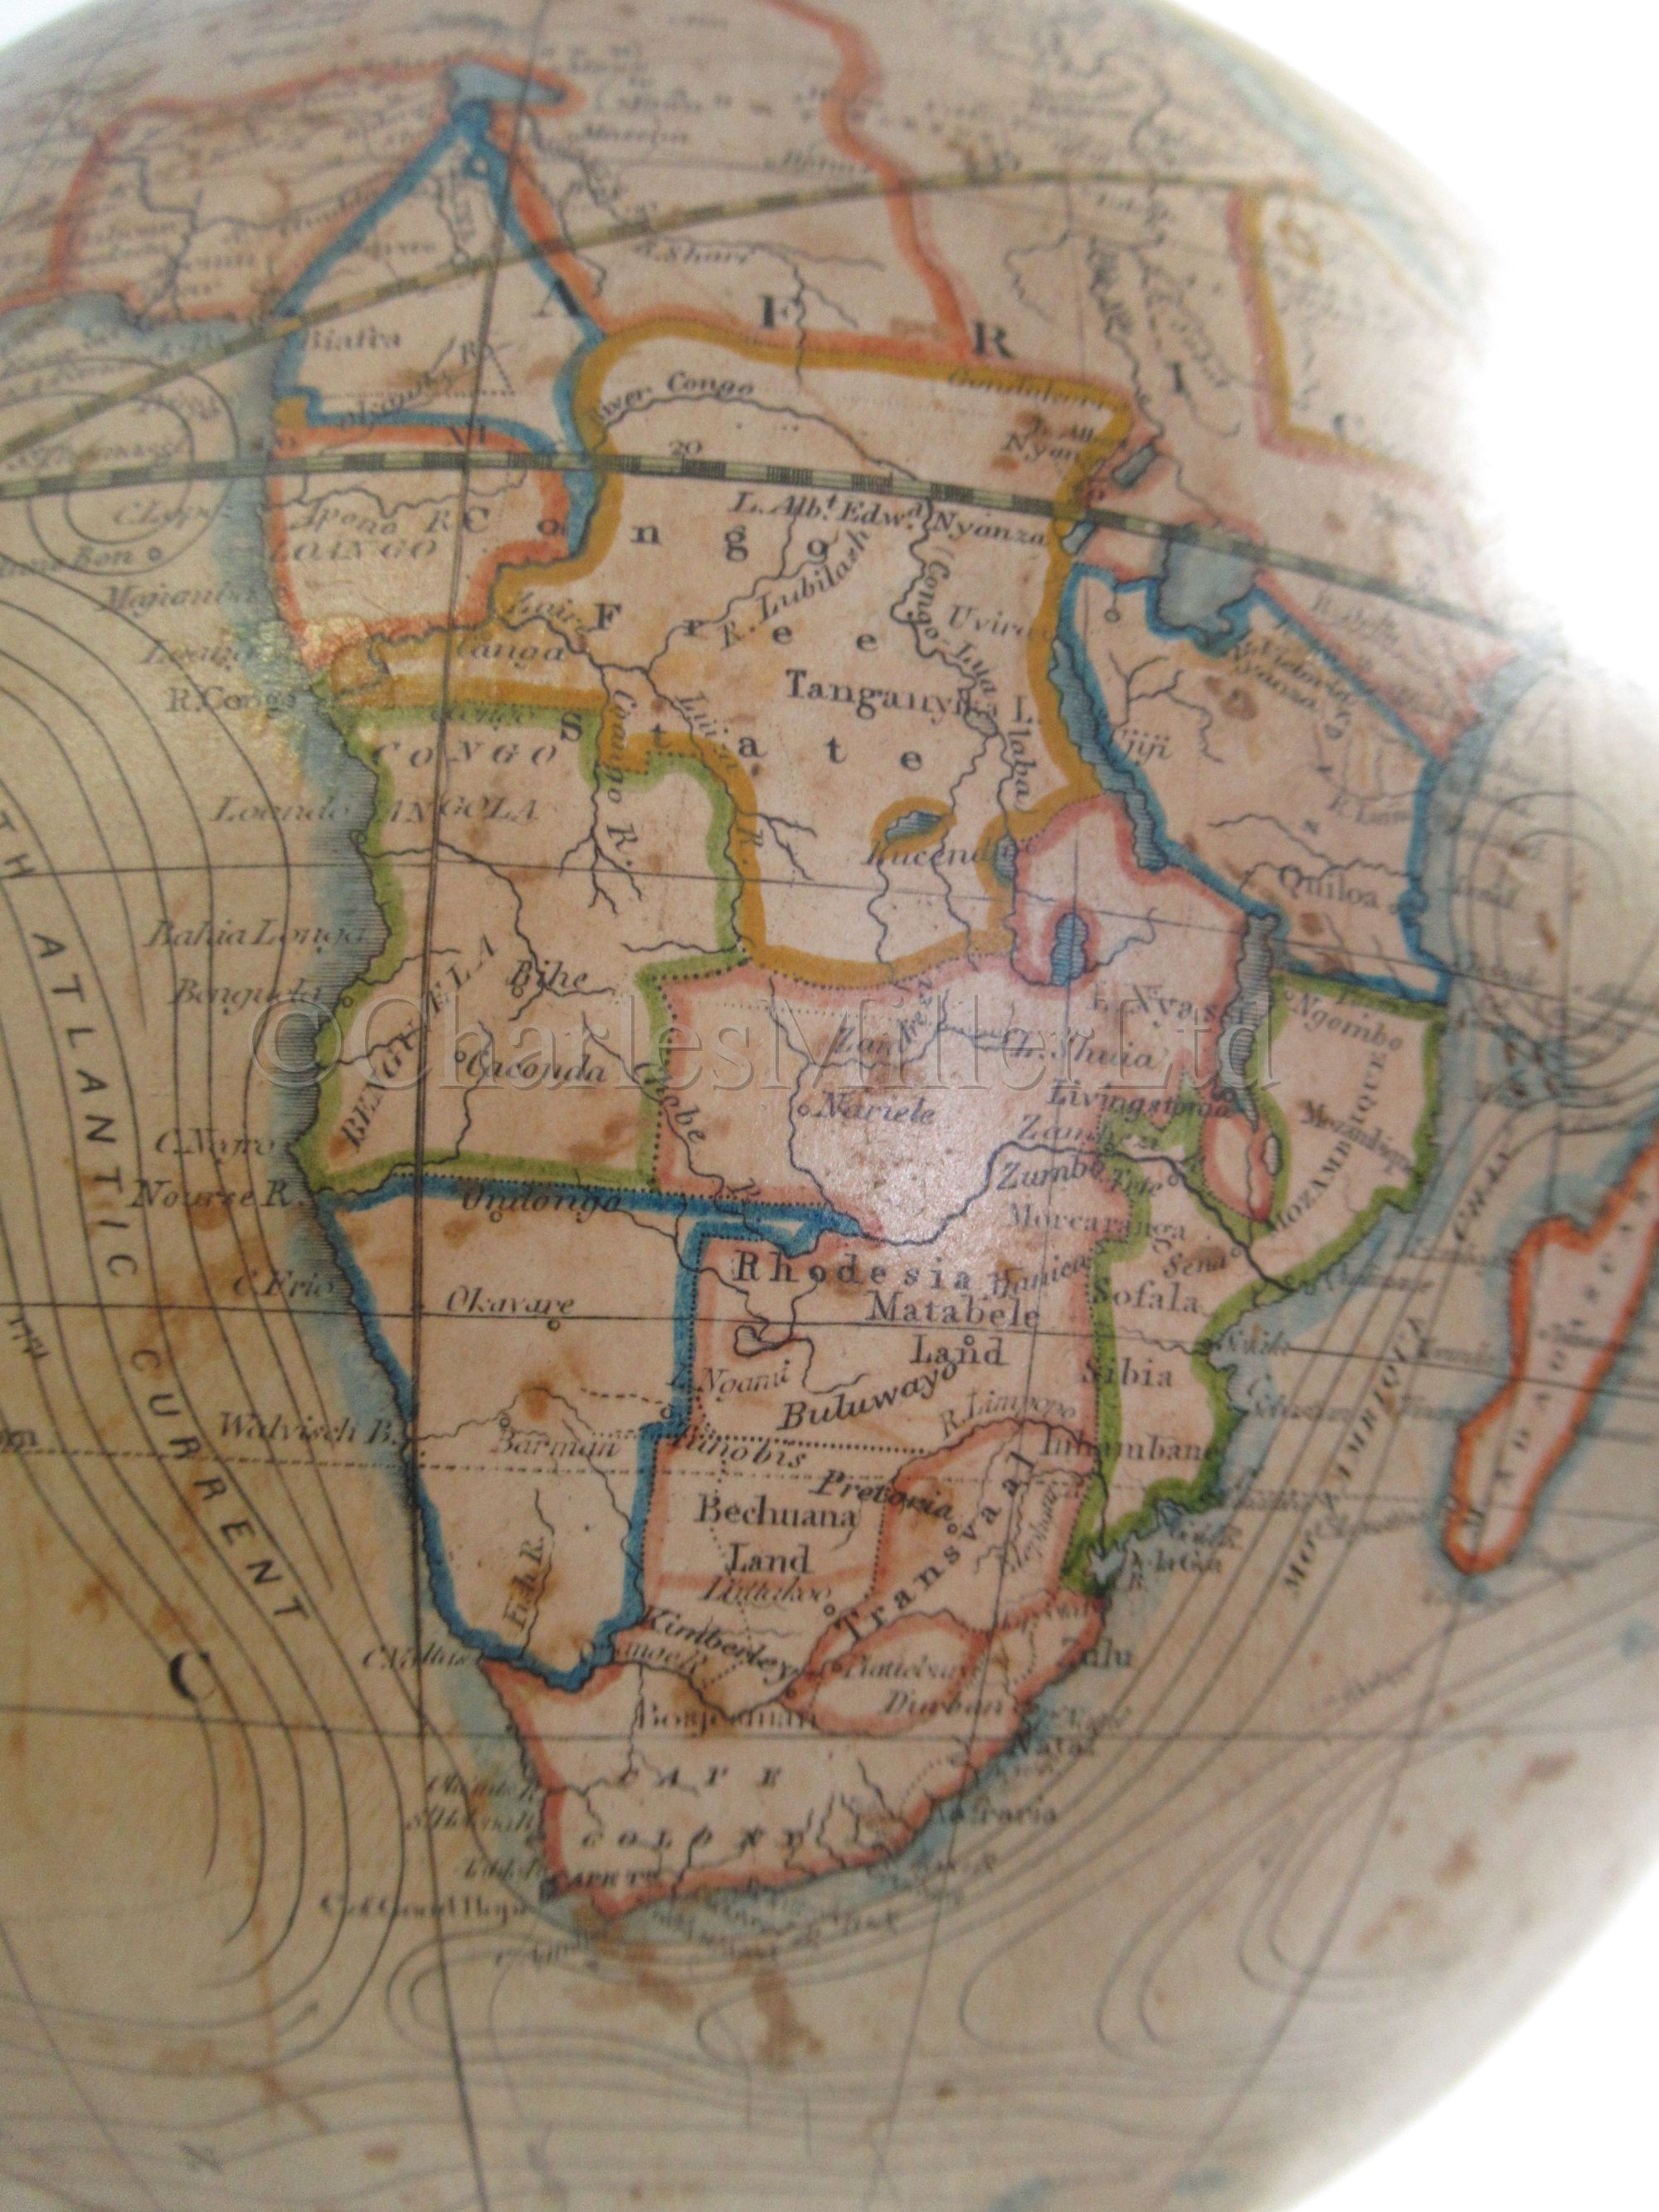 A 10IN. TERRESTRIAL GLOBE BY C. SMITH & SON, LONDON. CIRCA 1890 - Image 11 of 12